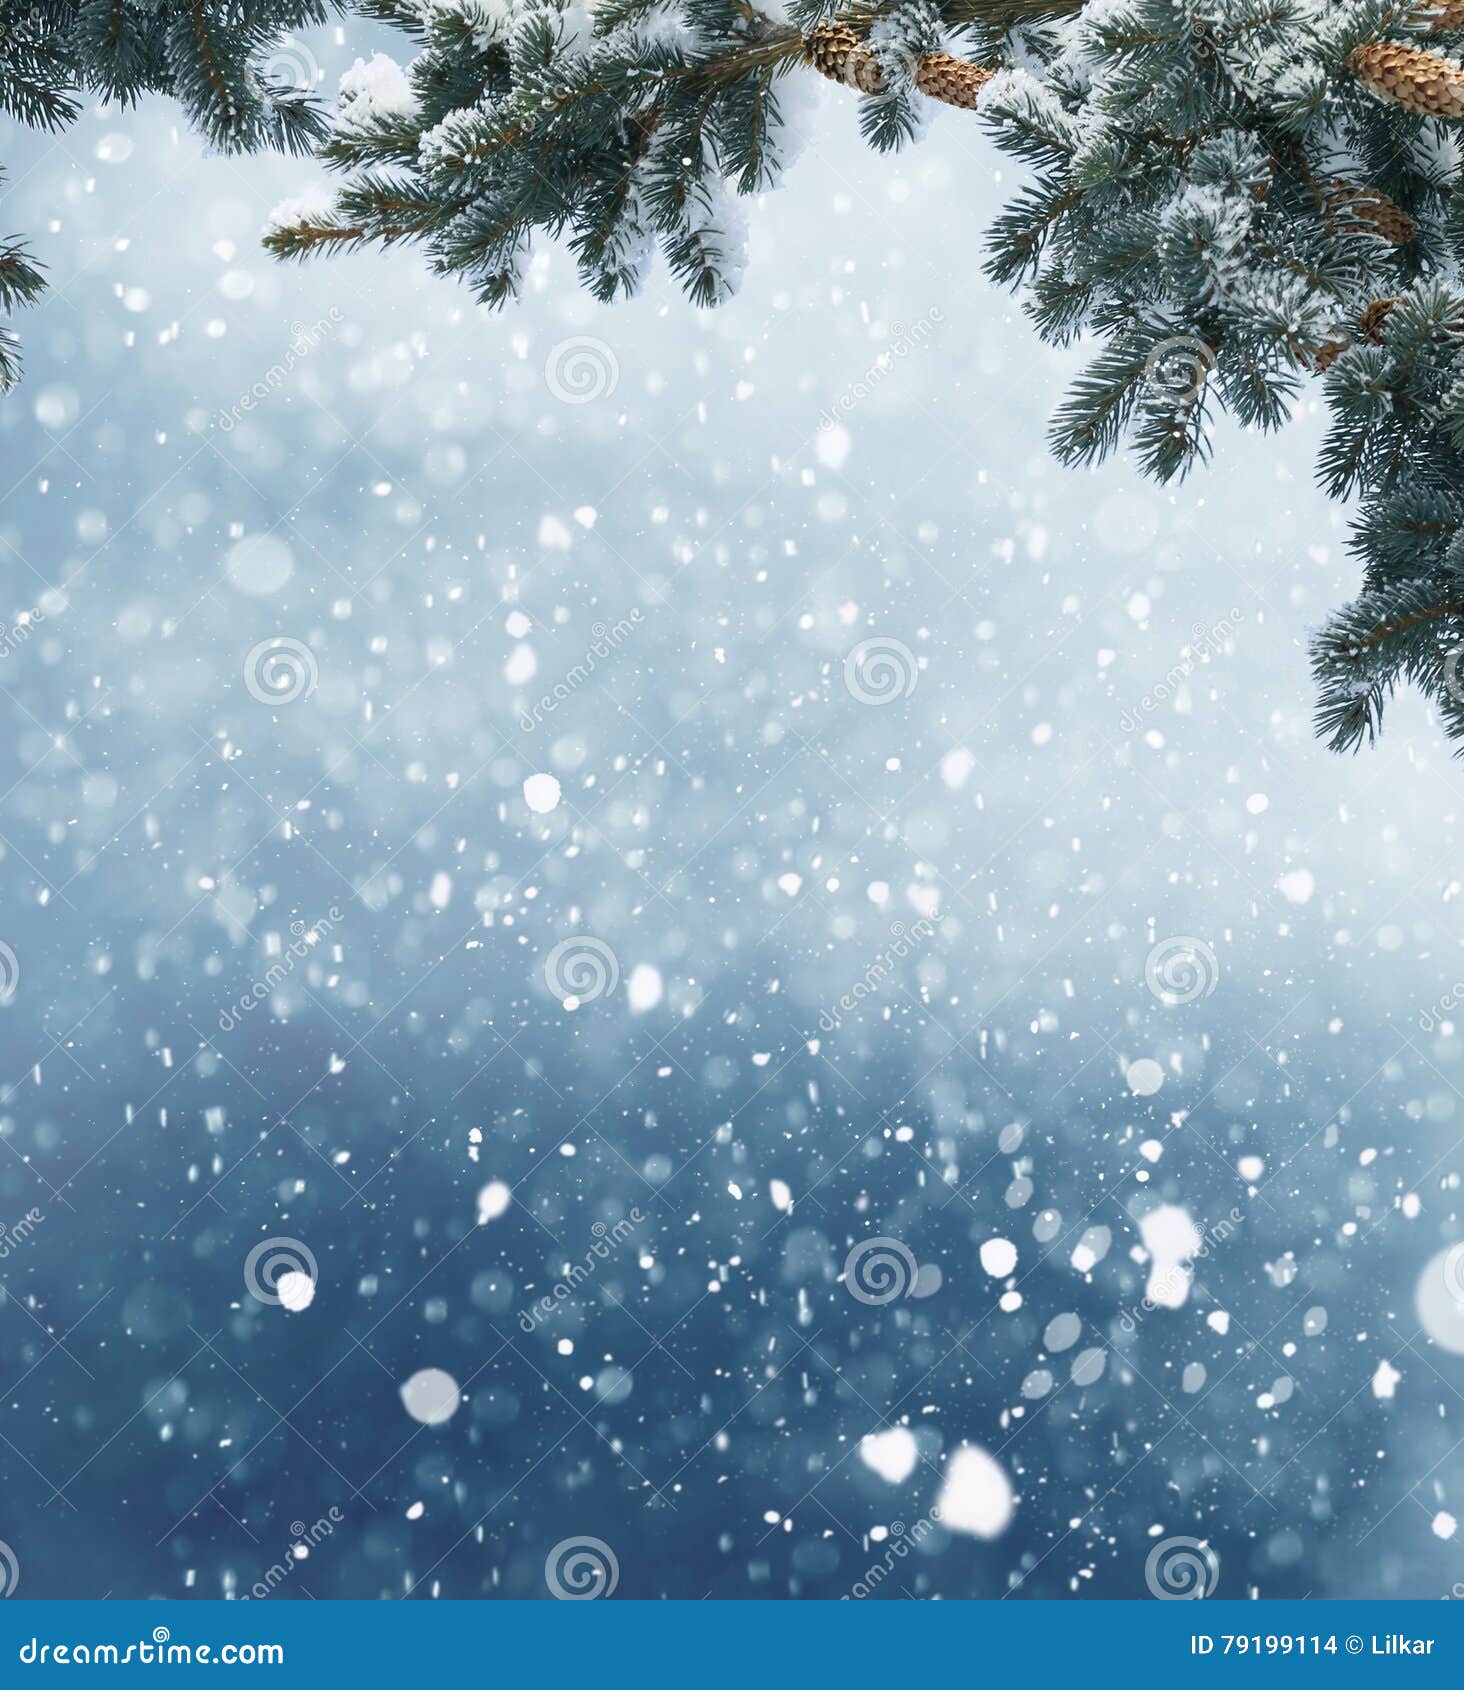 winter christmas background with fir tree branch and cones